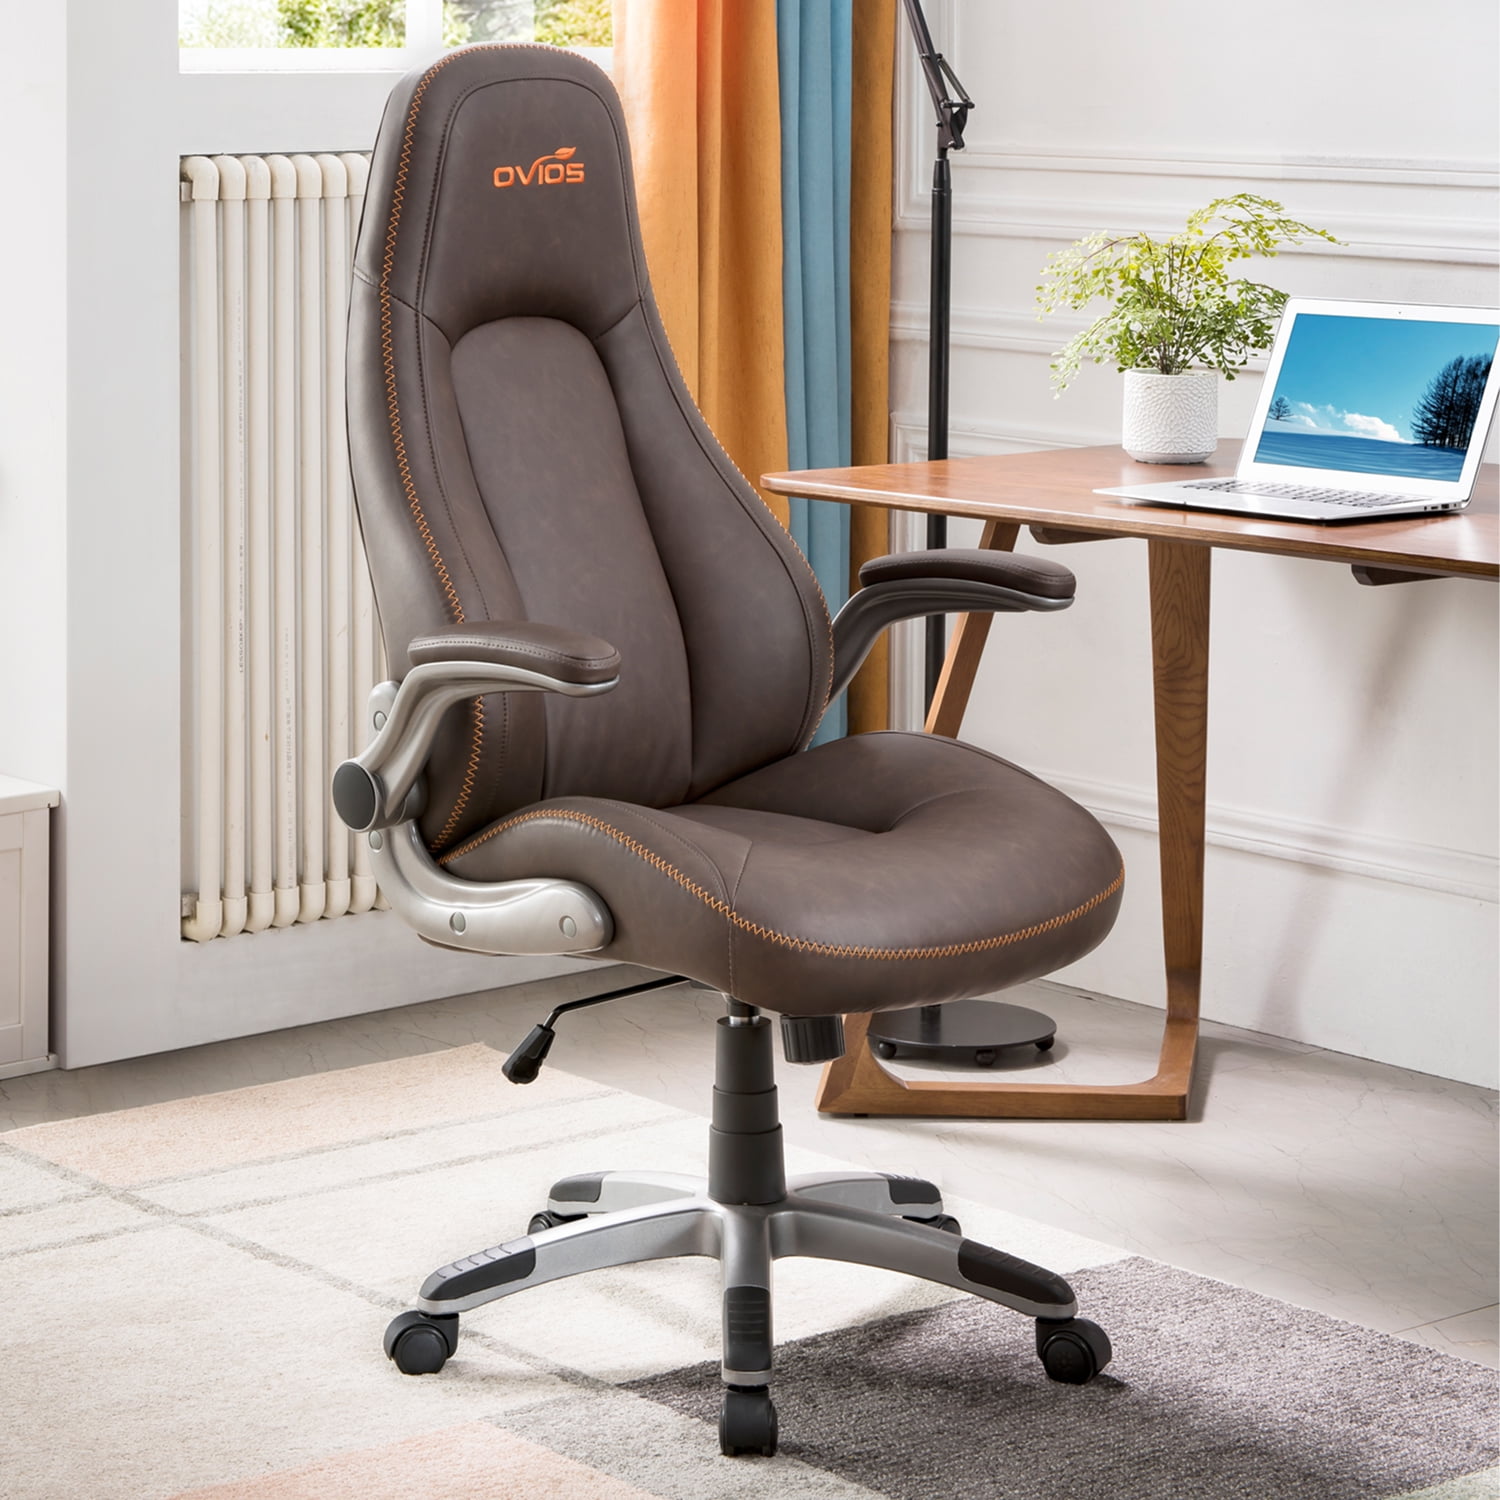 Best Ergonomic Office Chairs For Back Pain Relief